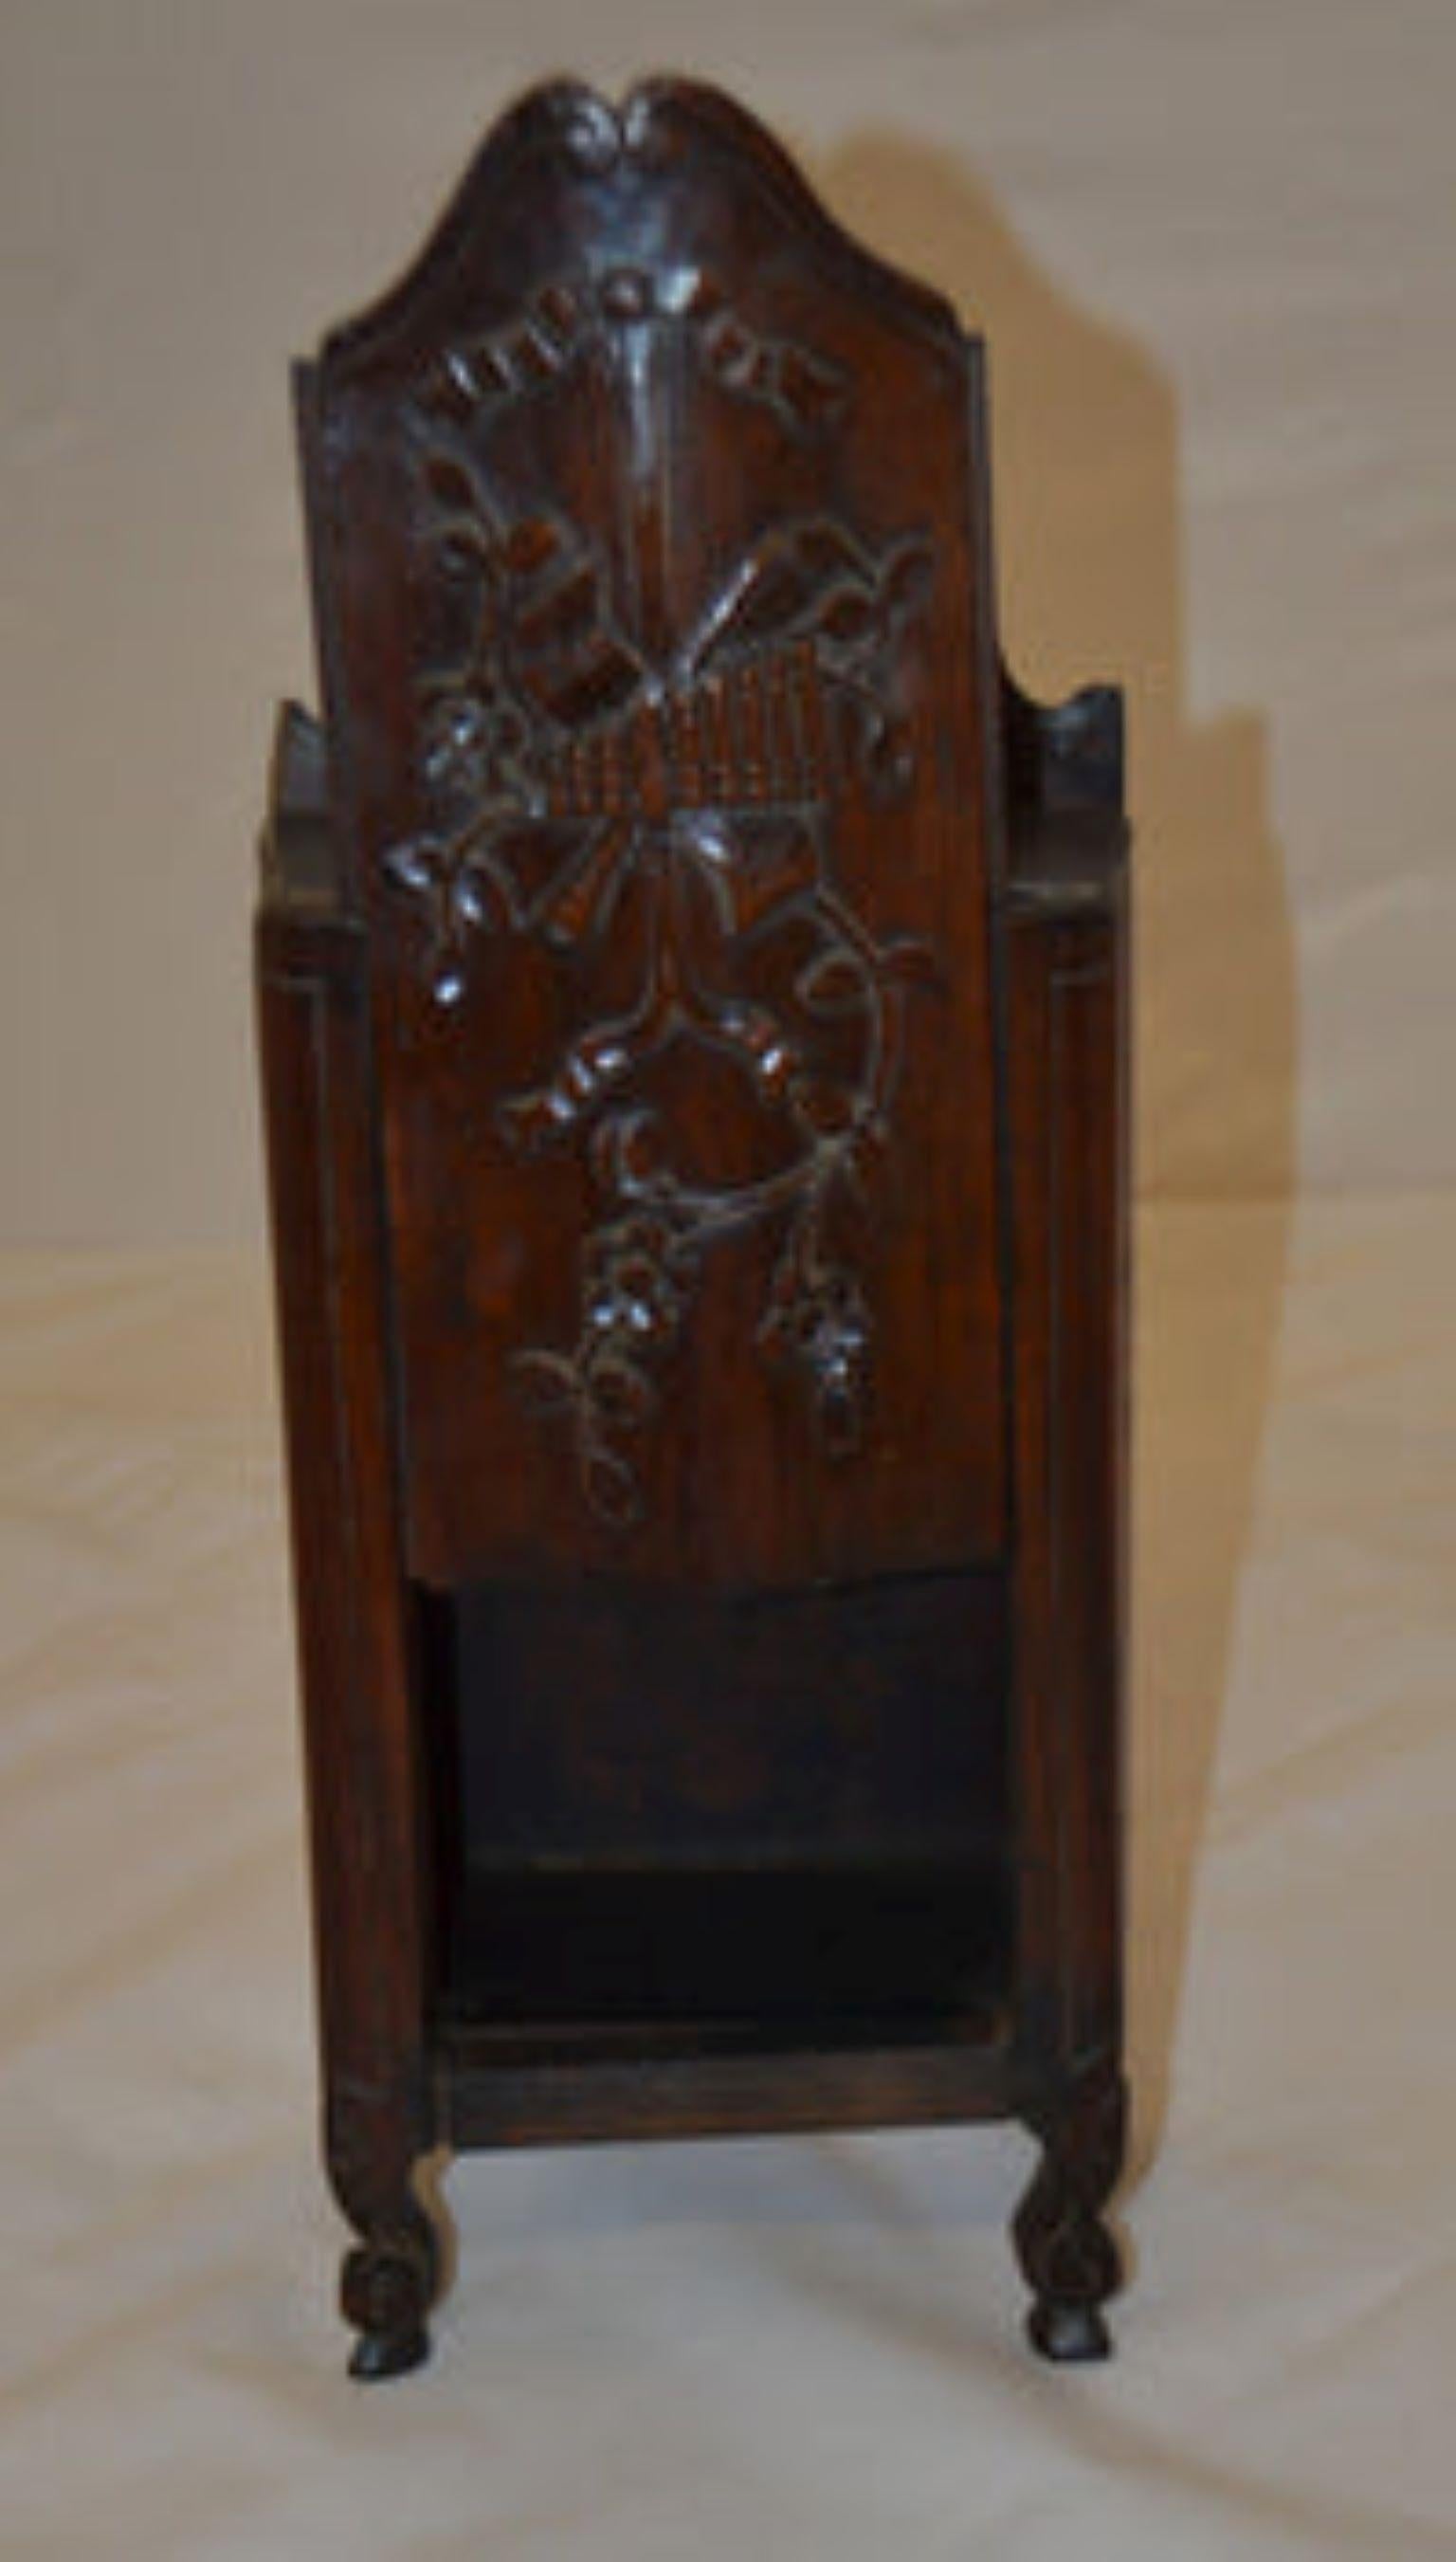 Late 19th century salt box, with an intricate carved flower motif on the sliding door, resting on scroll feet with a top flower finial. 1880, 16.5